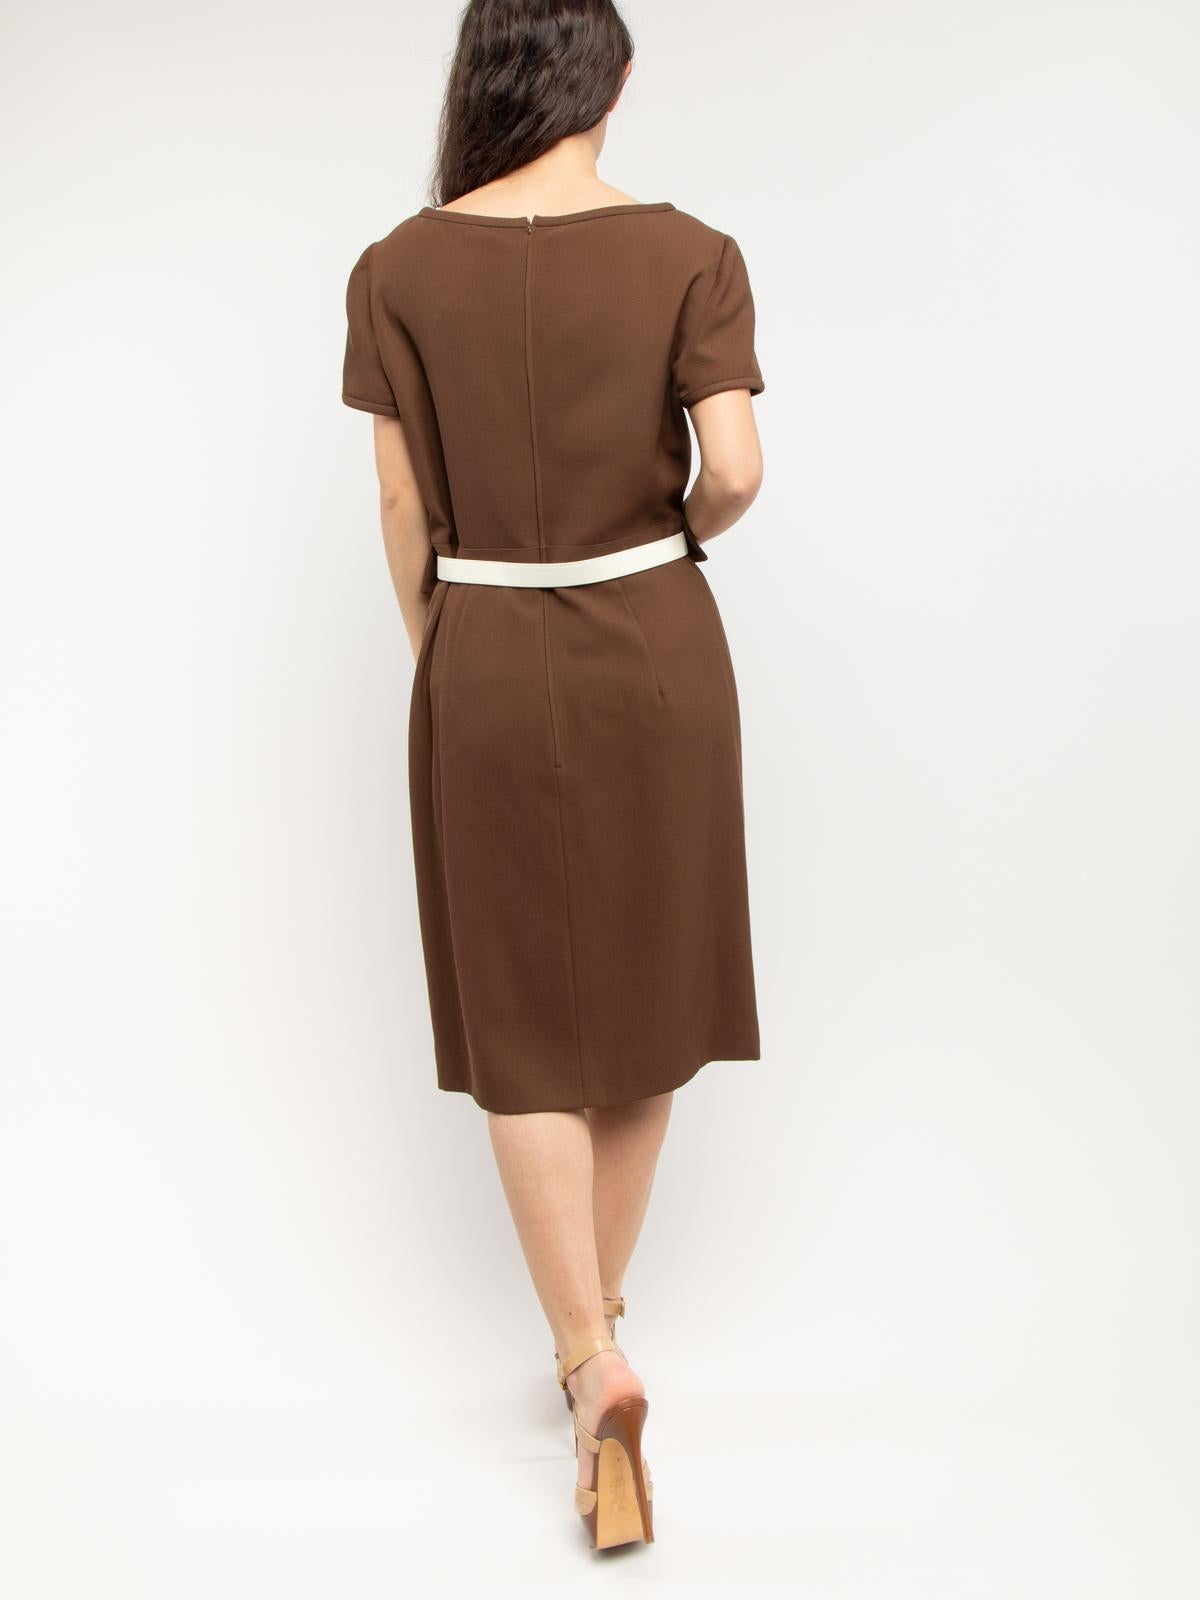 CONDITION is Very good. Minimal wear and pilling to dress is evident. Creases to leather belt, slightly visible stains on belt of this used Valentino Boutique designer resale item. Details Valentino Boutique Brown Virgin wool Belted dress Regular